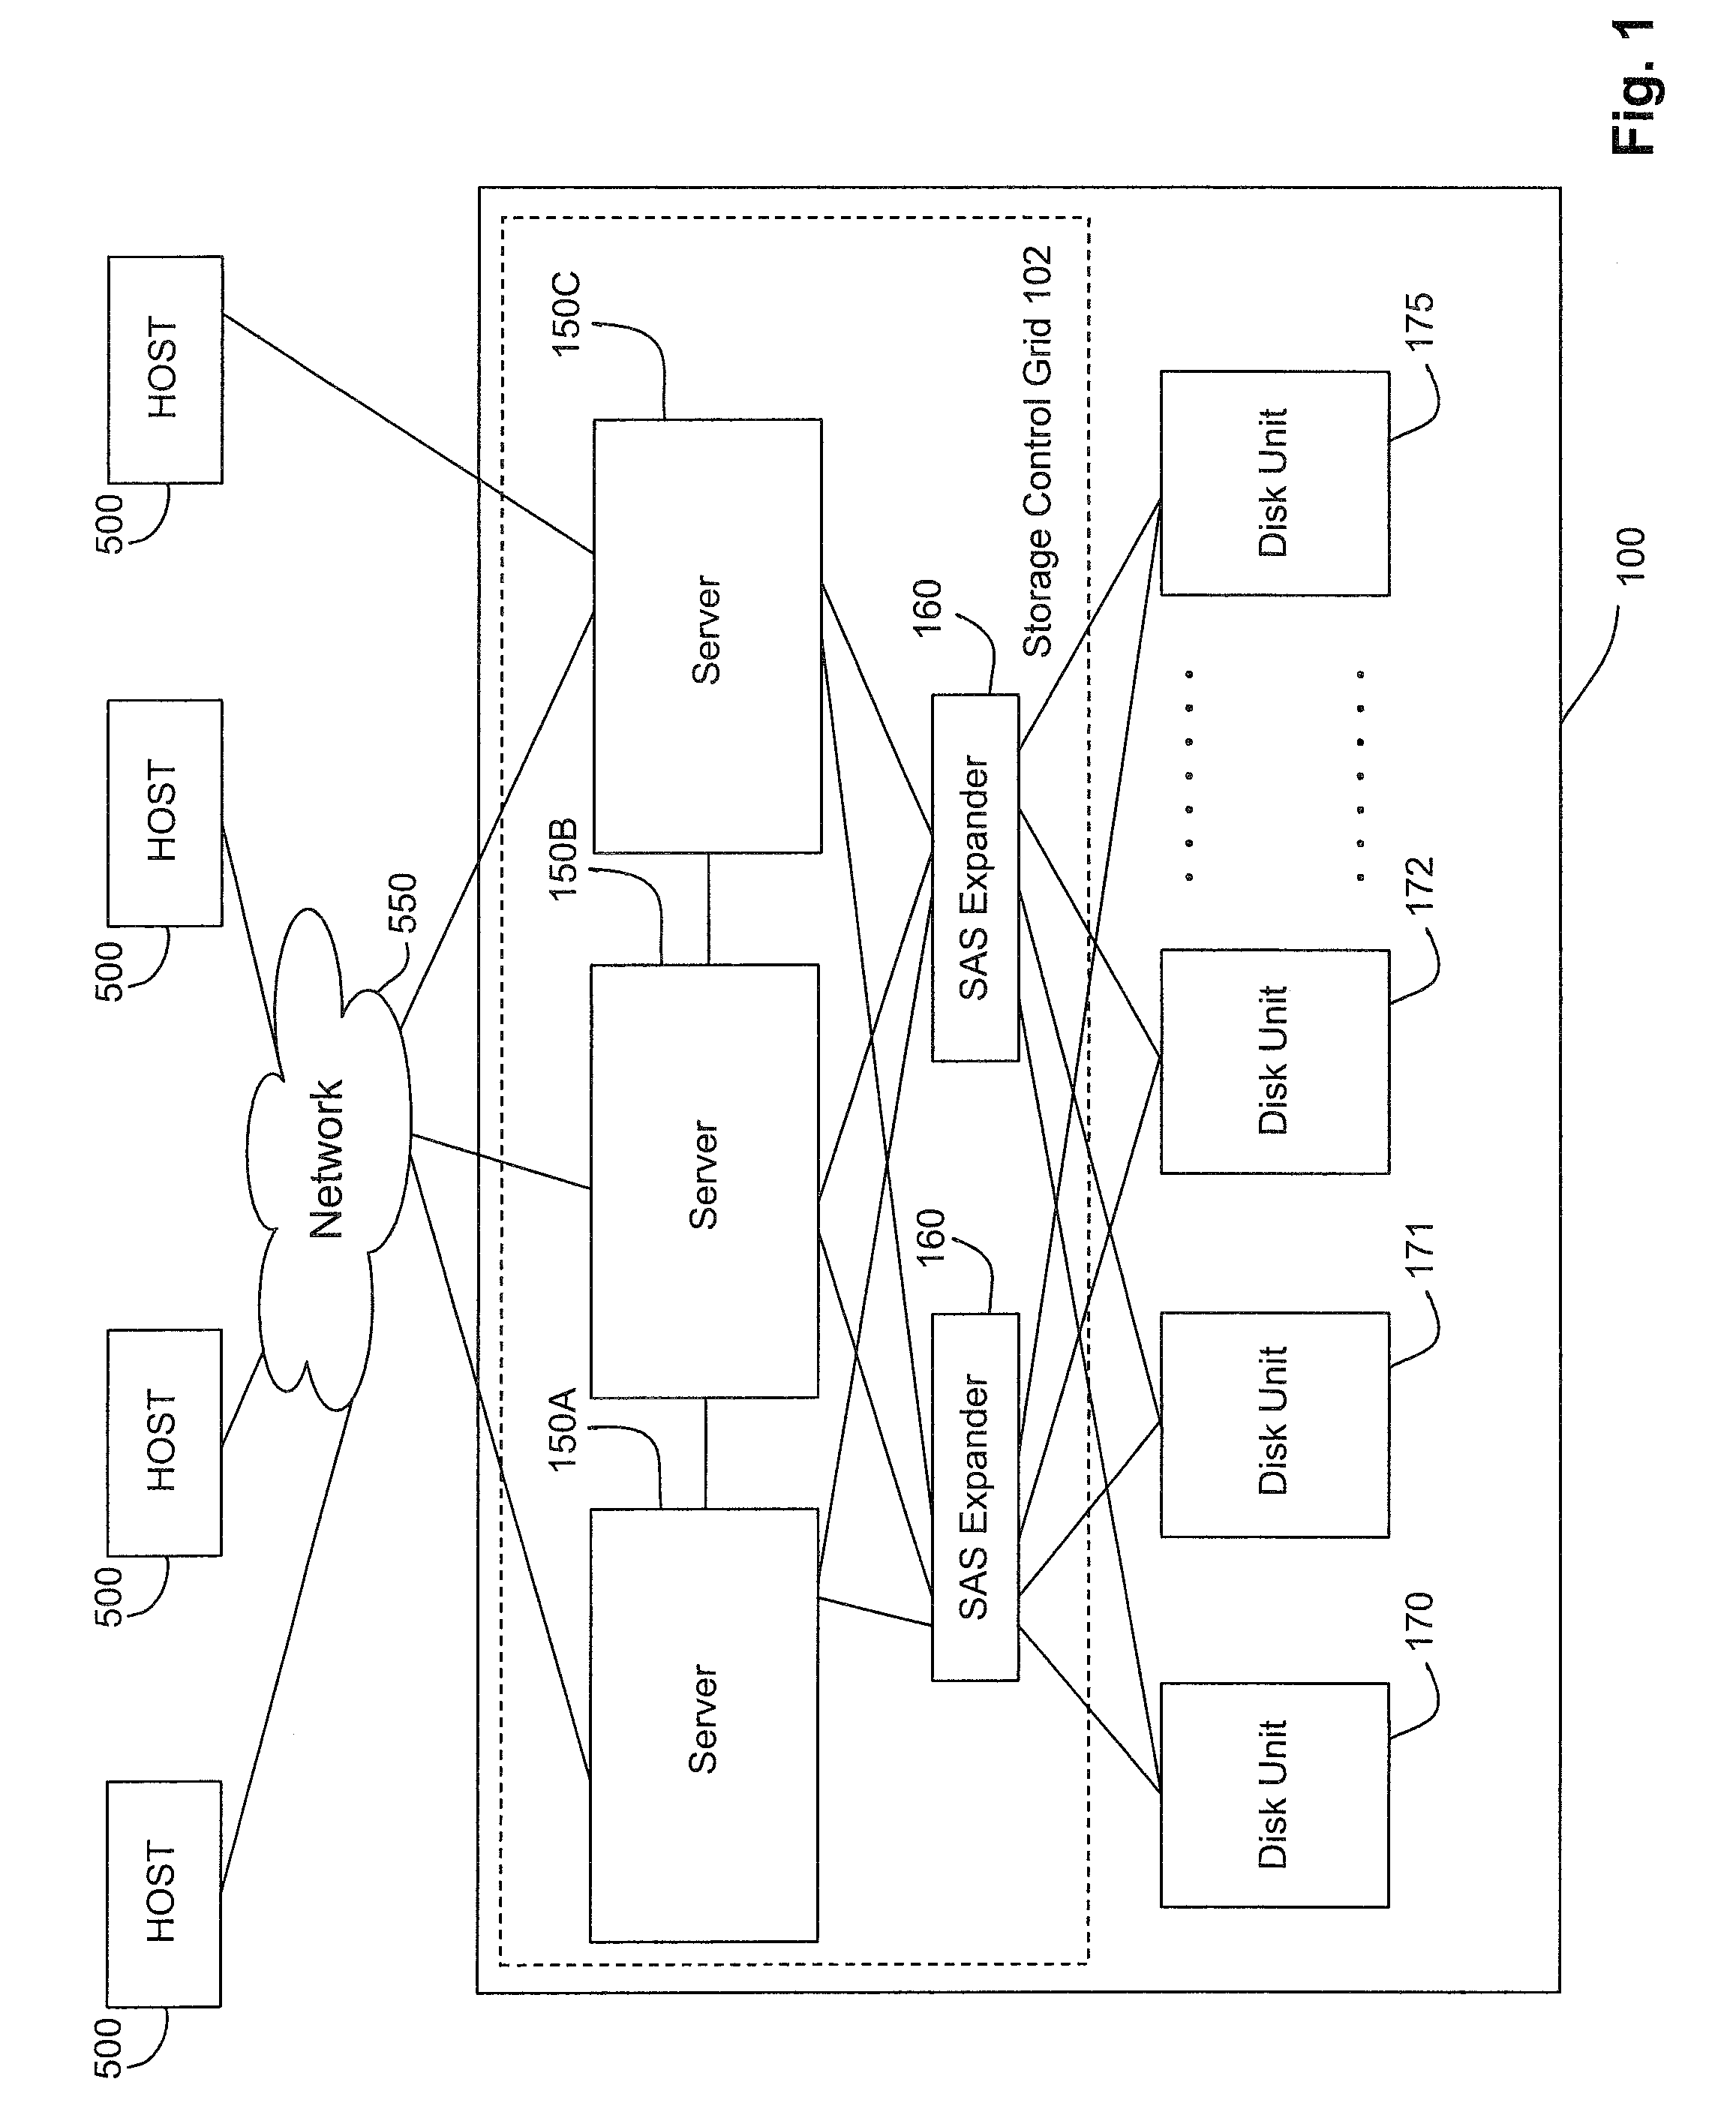 Serial attached SCSI (SAS) grid storage system and method of operating thereof